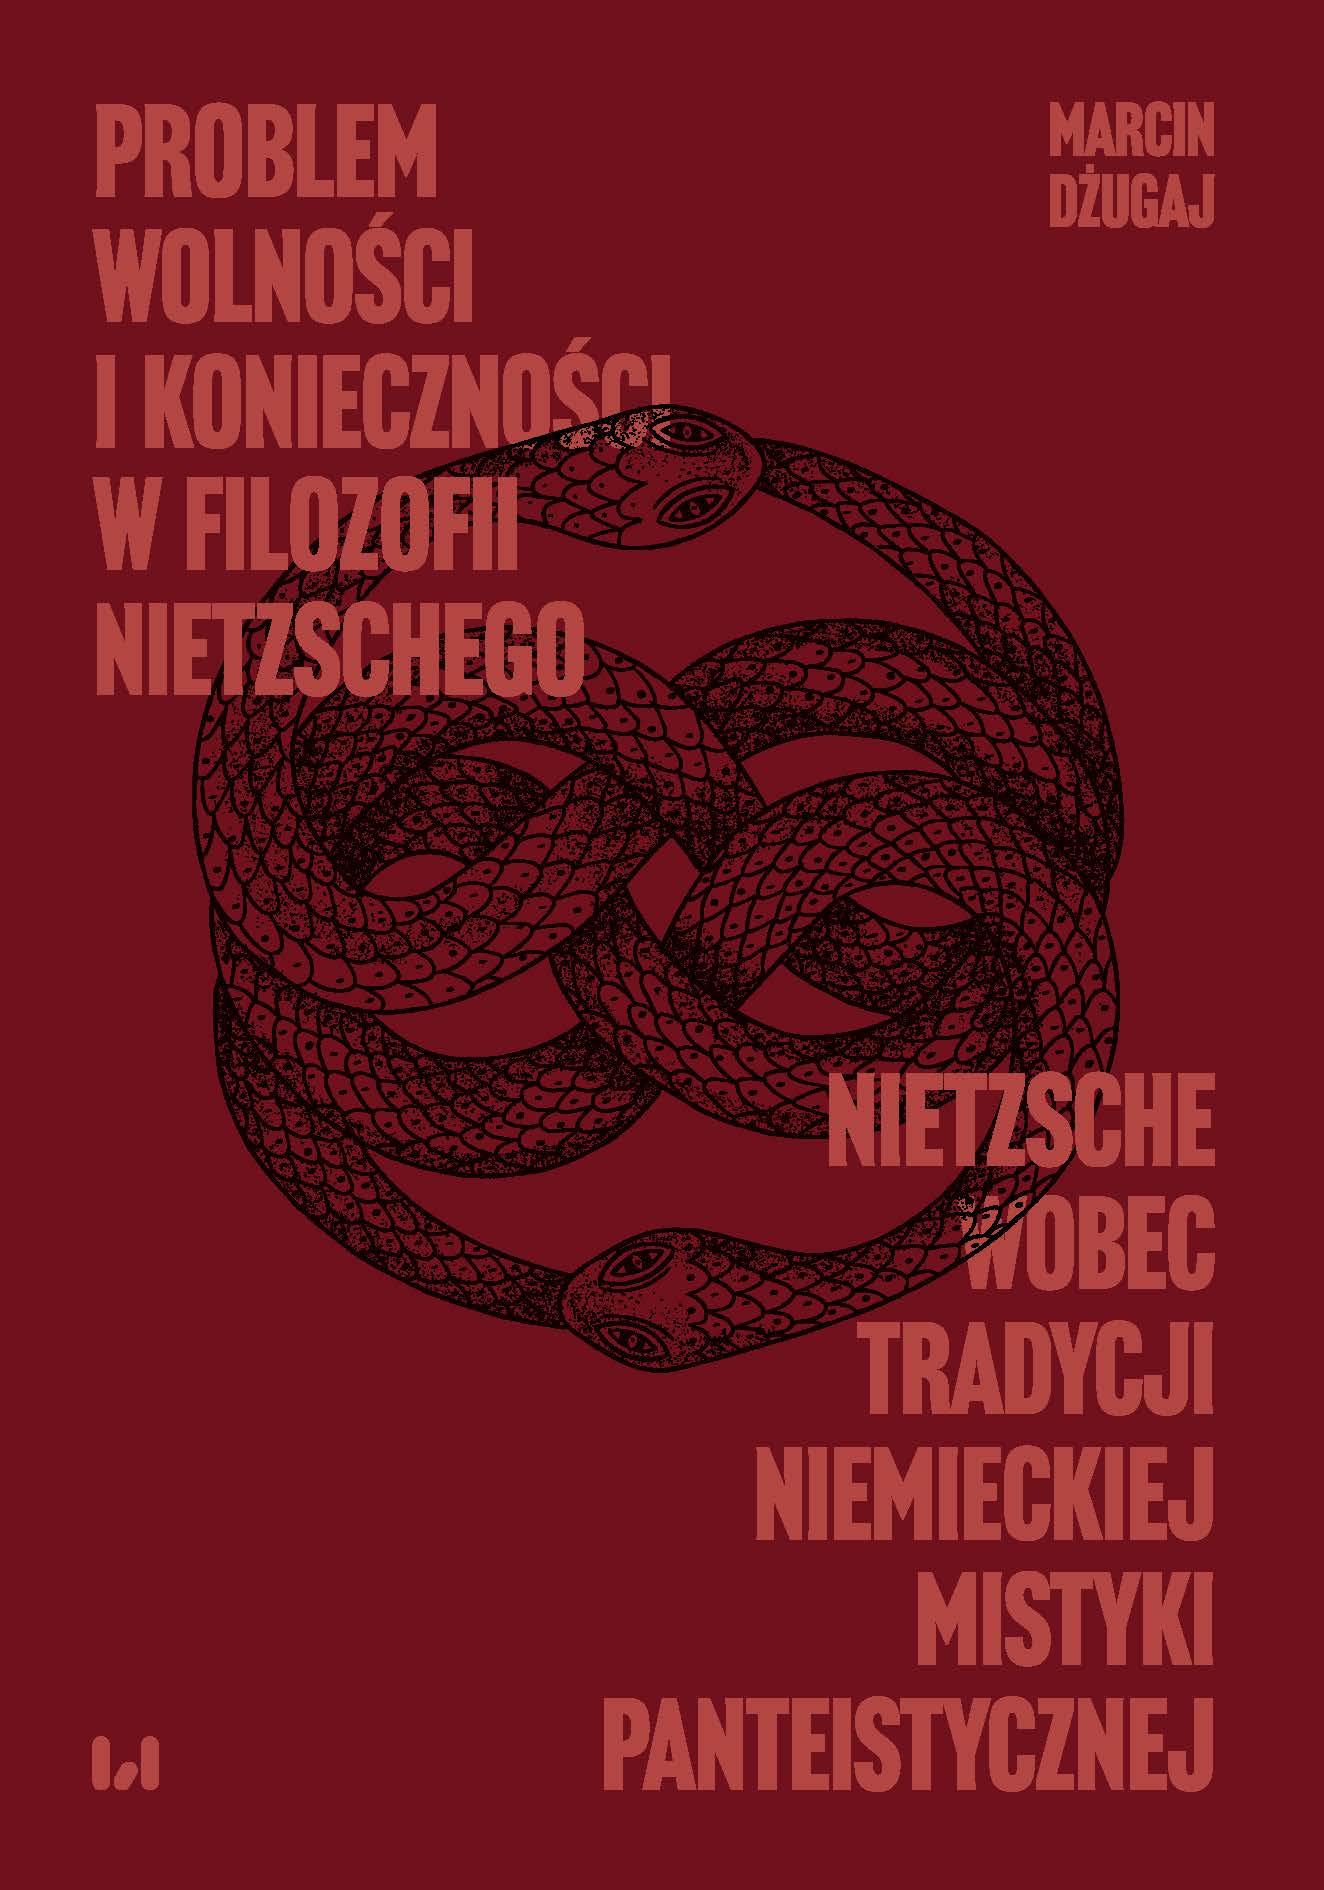 The Problem of Freedom and Necessity in Nietzsche’s Philosophy. Nietzsche in relation to the German Pantheistic Mysticism Tradition